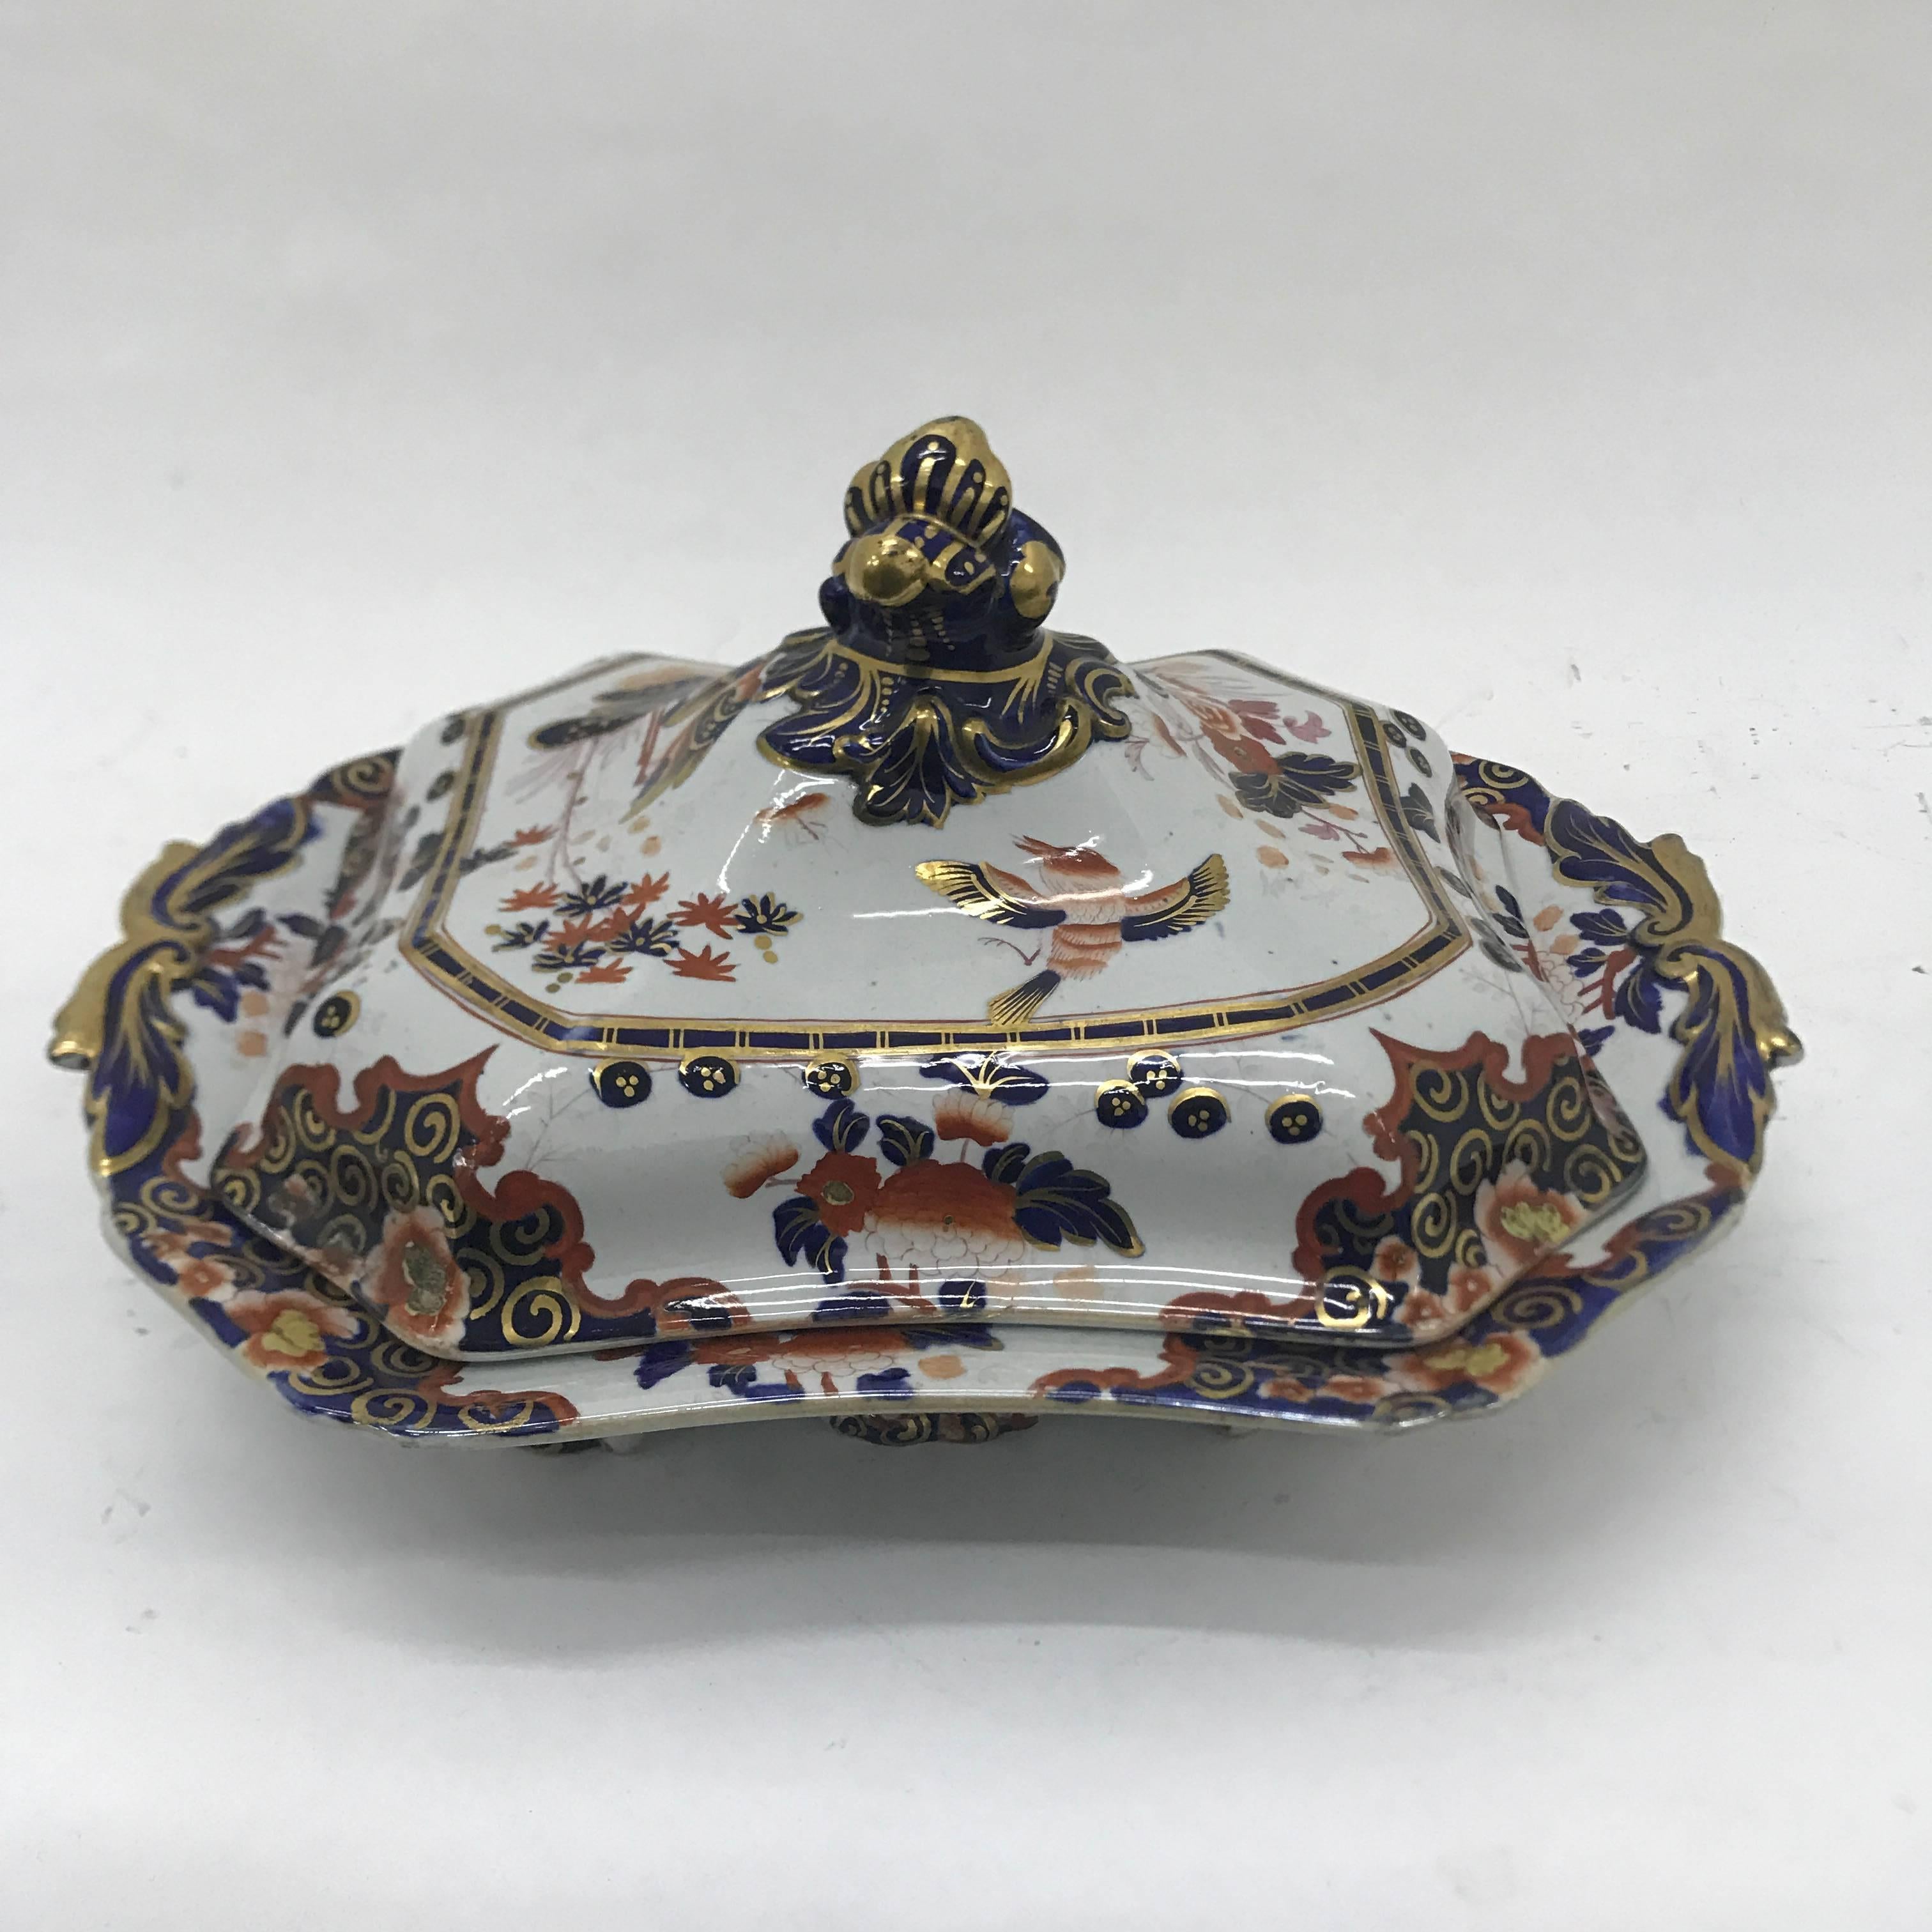 Imari Victorian soup tureen, made in England by Birks bros & Seddon between 1877 and 1886, good conditions overall.